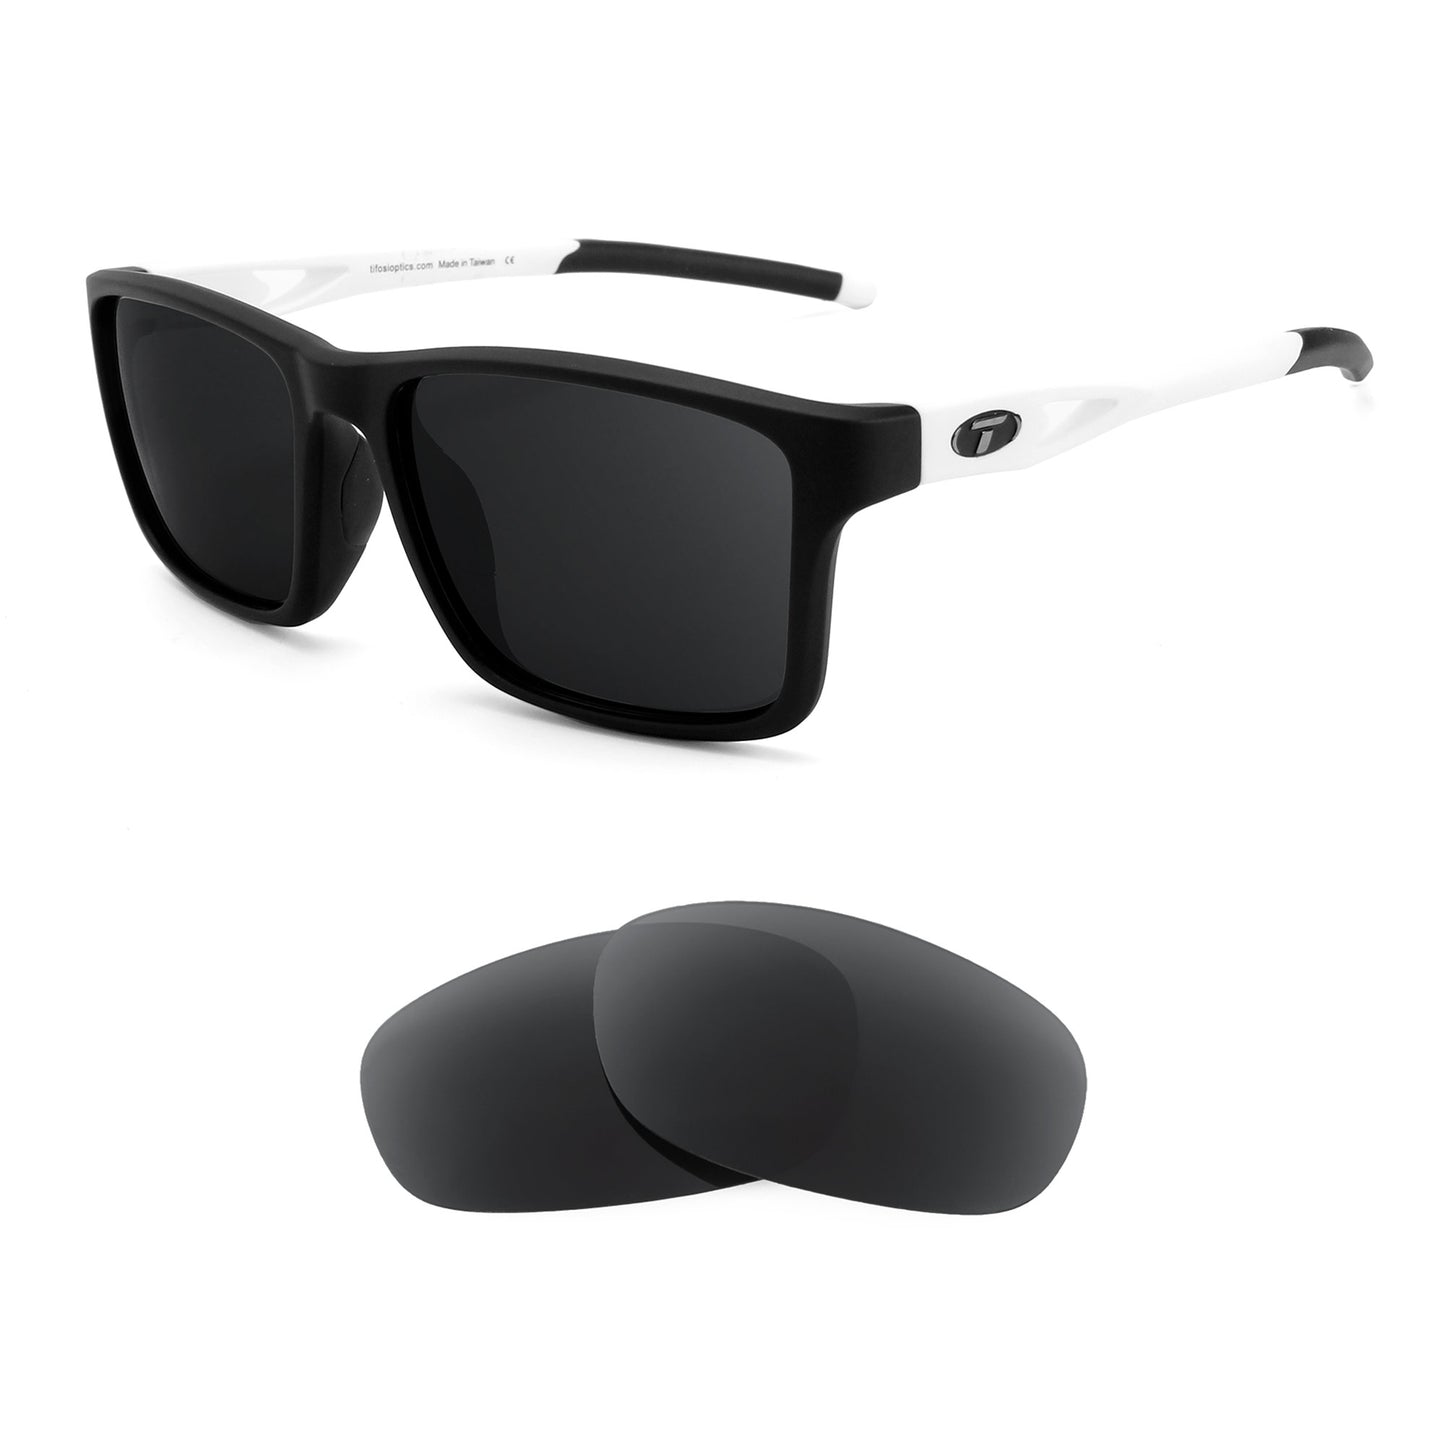 Tifosi Marzen sunglasses with replacement lenses